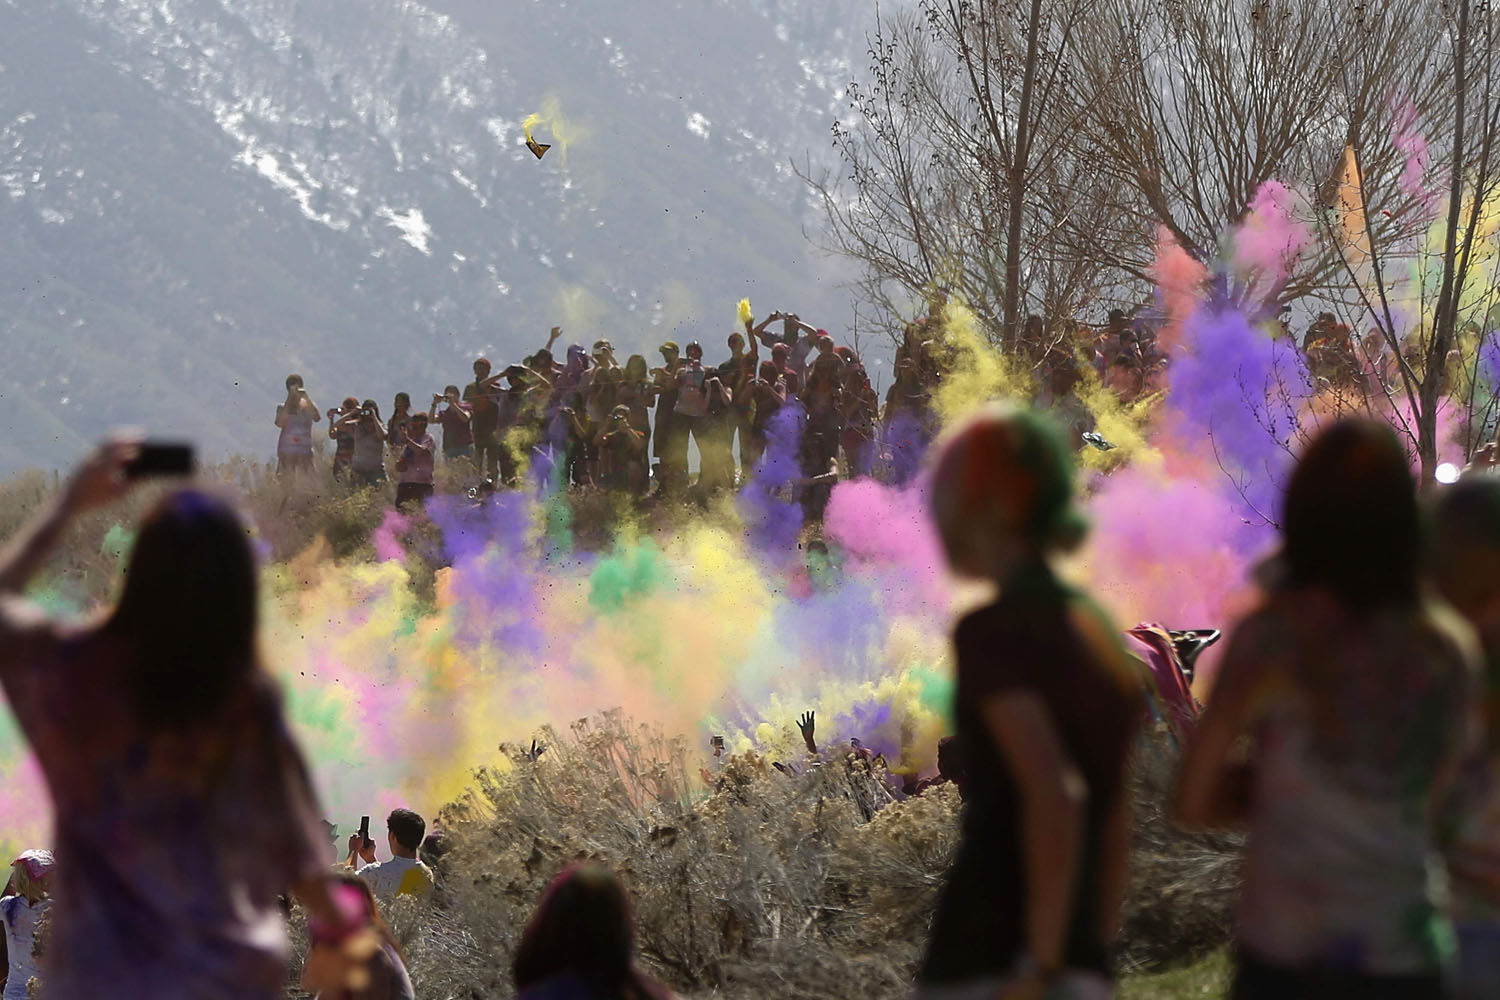 Spectators watch as participants dance and throw colored chalk during the Holi Festival of Colors at the Sri Sri Radha Krishna Temple in Spanish Fork, Utah